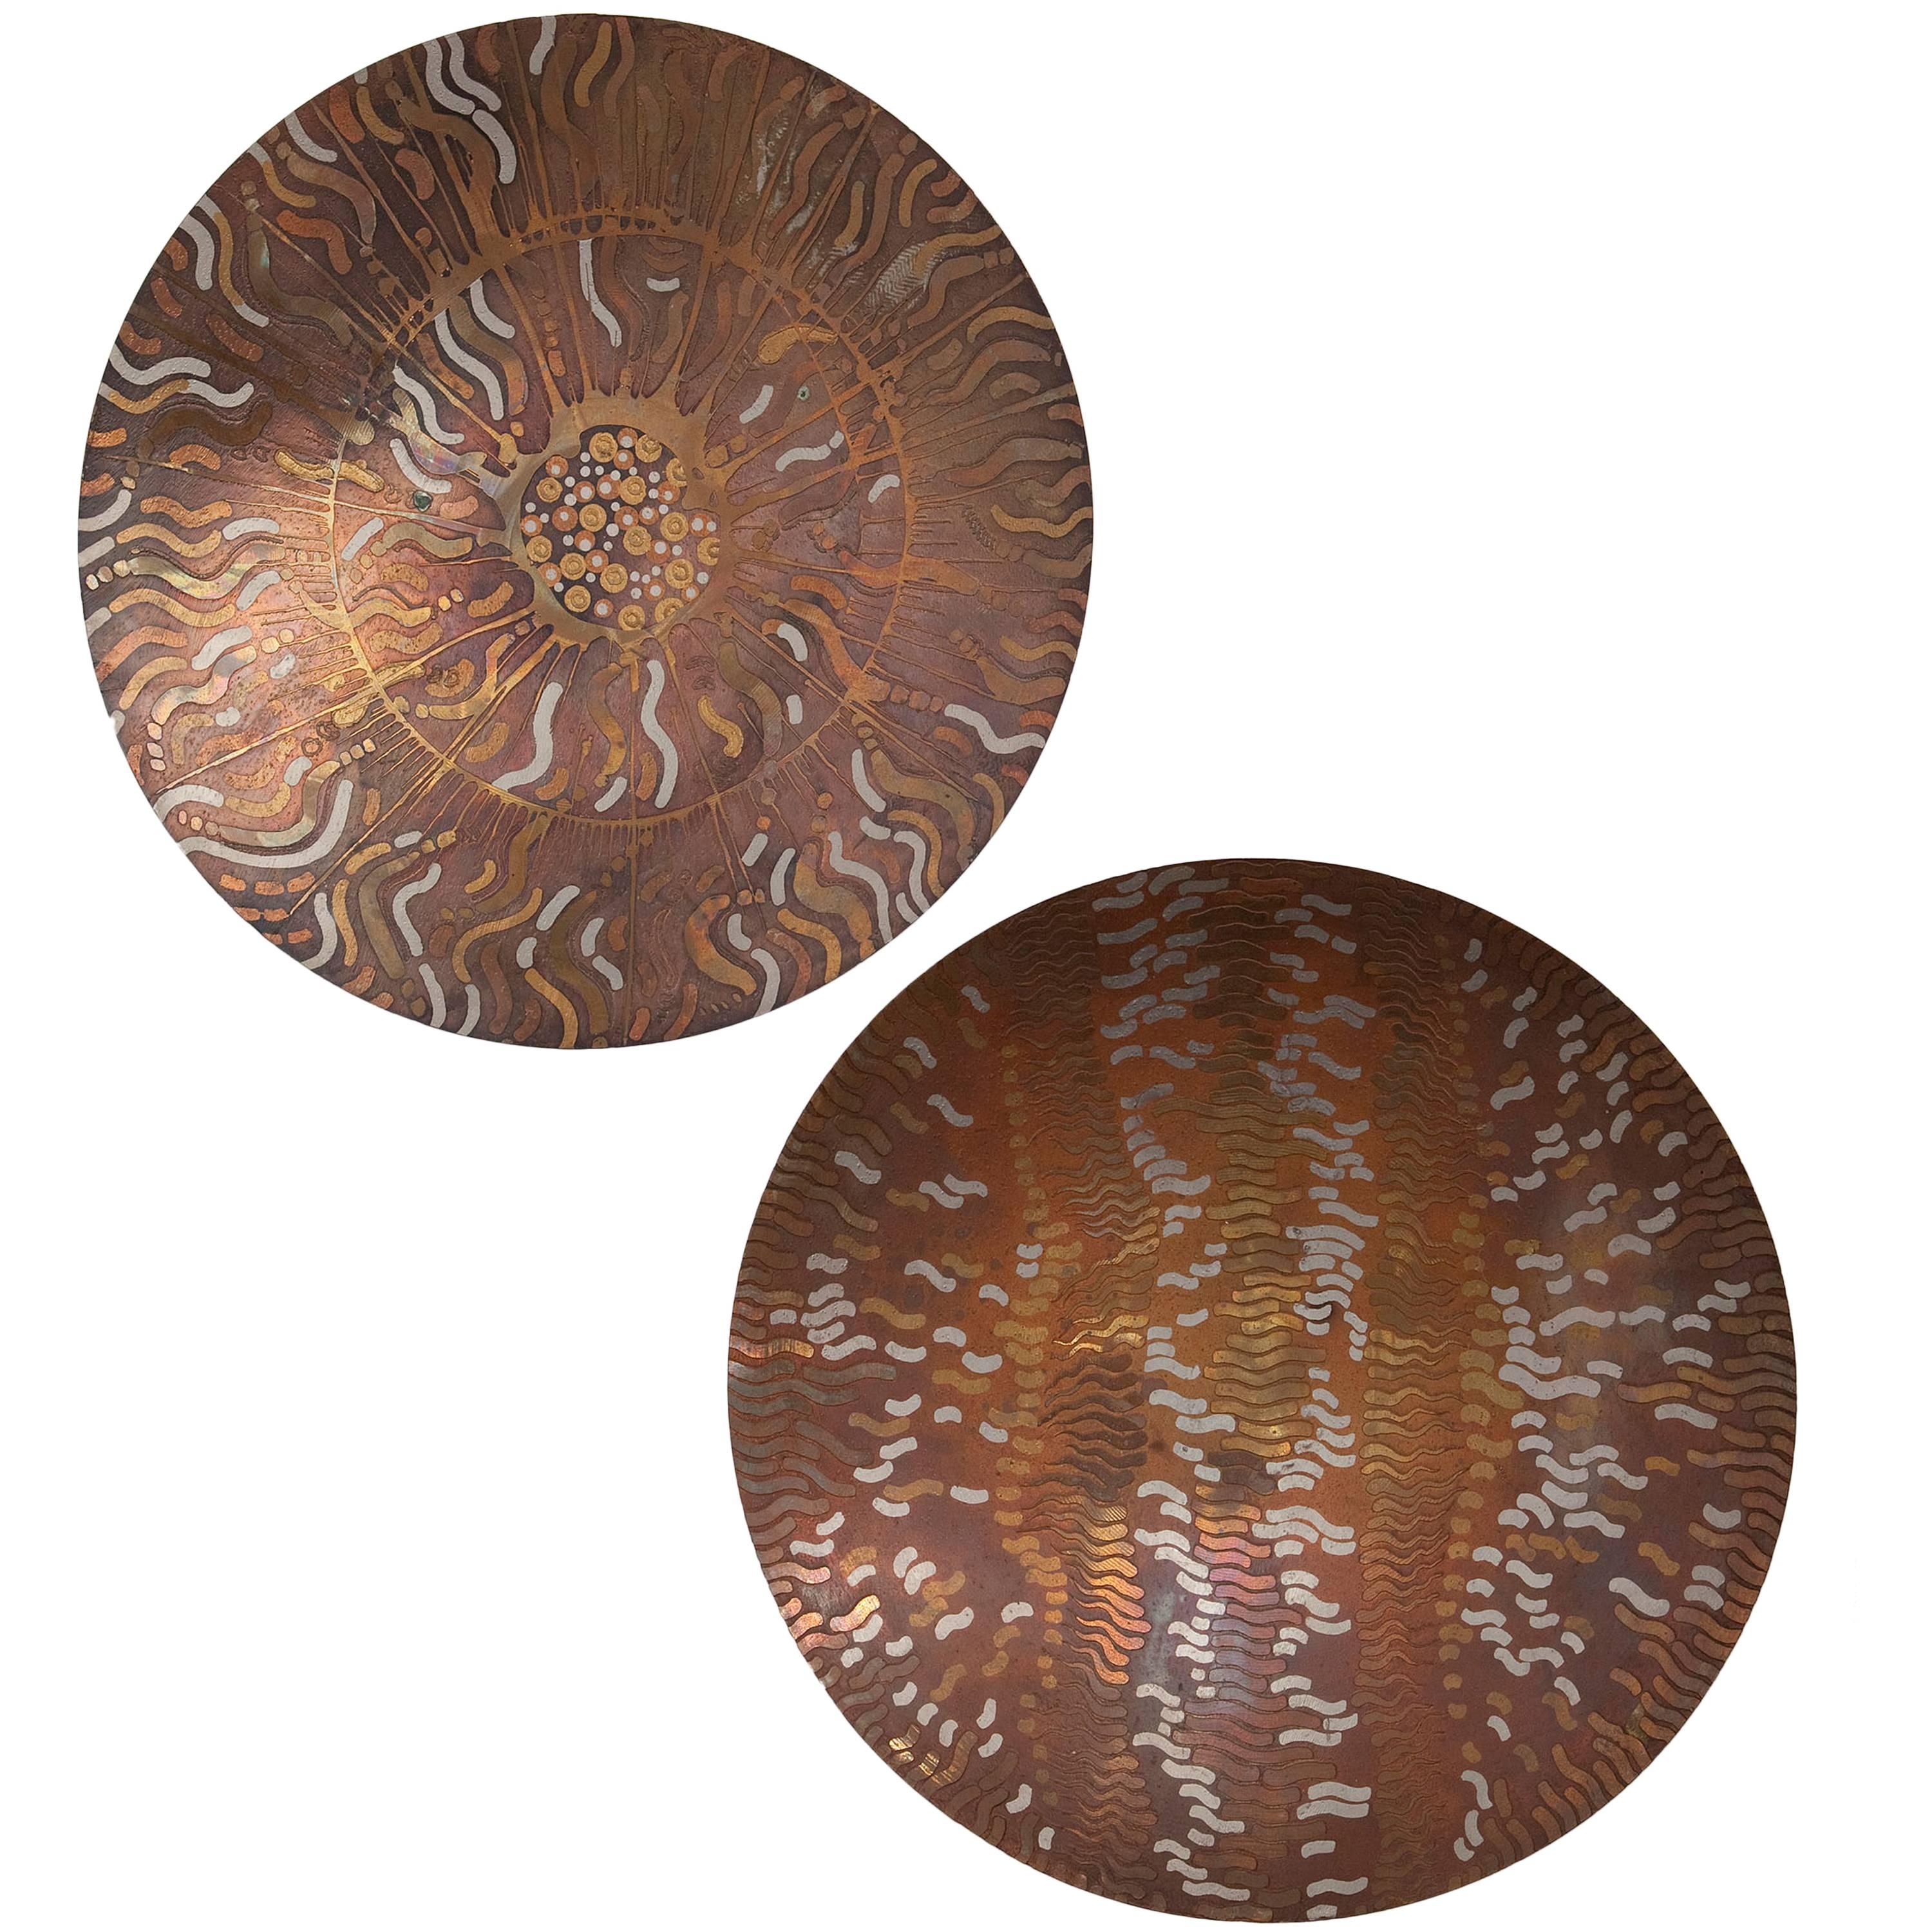 Pair of Etched Copper Chargers by Lee and Naomi Peck